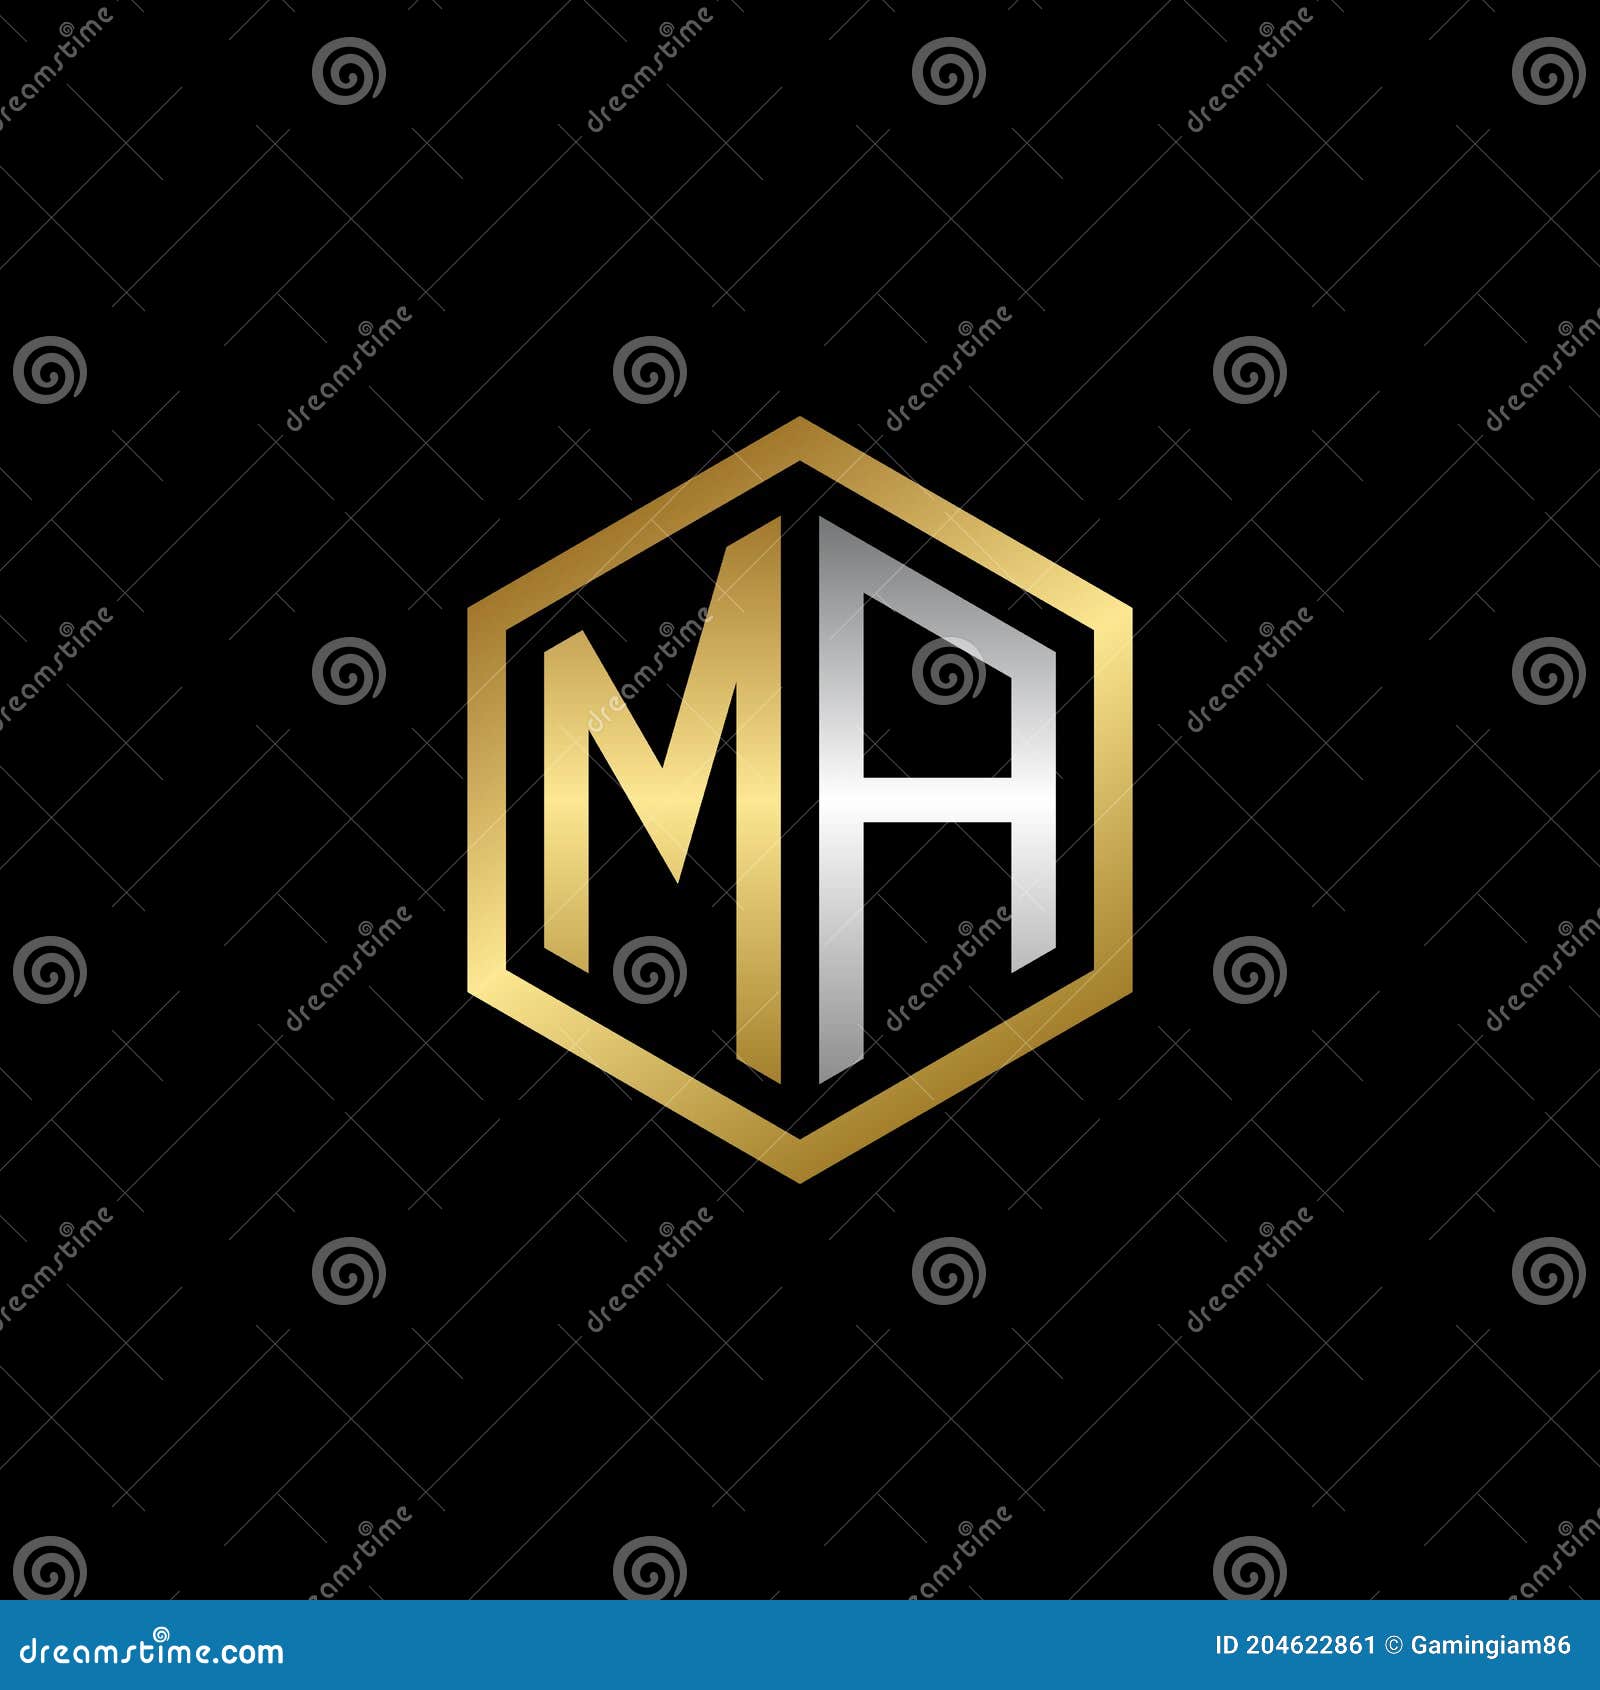 Mm Logo Red Star  Free Images at  - vector clip art